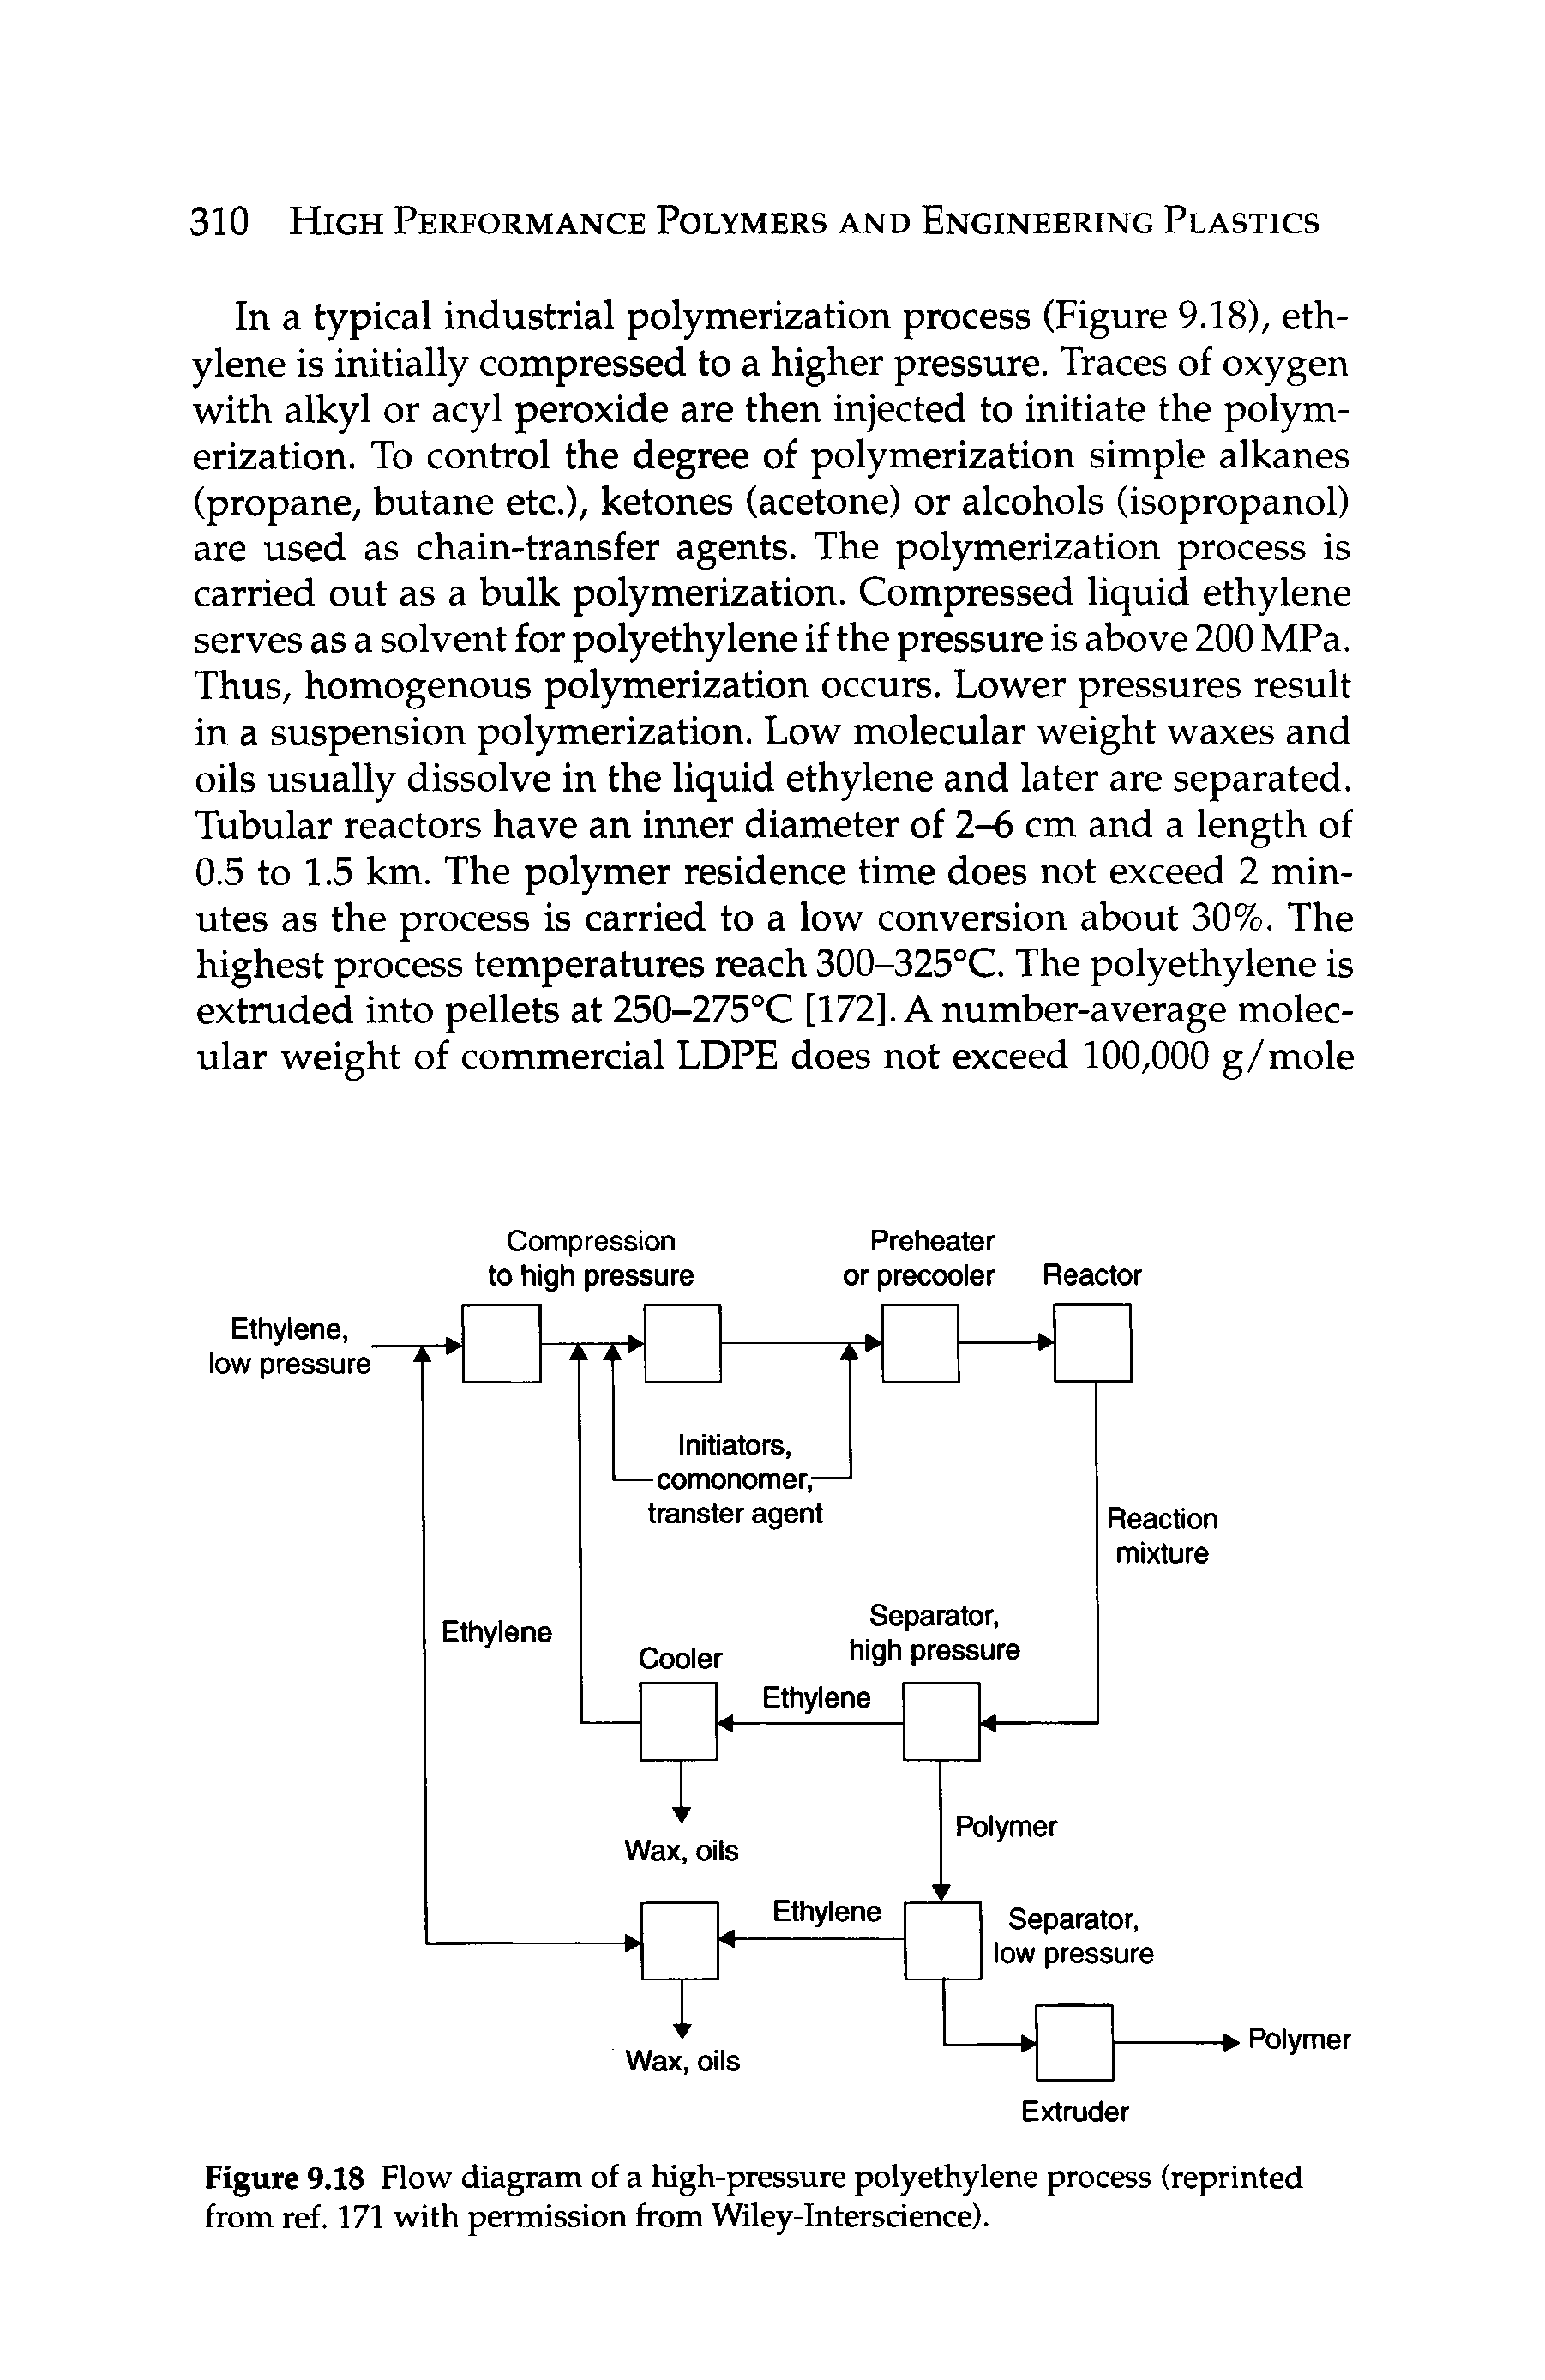 Figure 9.18 Flow diagram of a high-pressure polyethylene process (reprinted from ref. 171 with permission from WUey-Interscience).